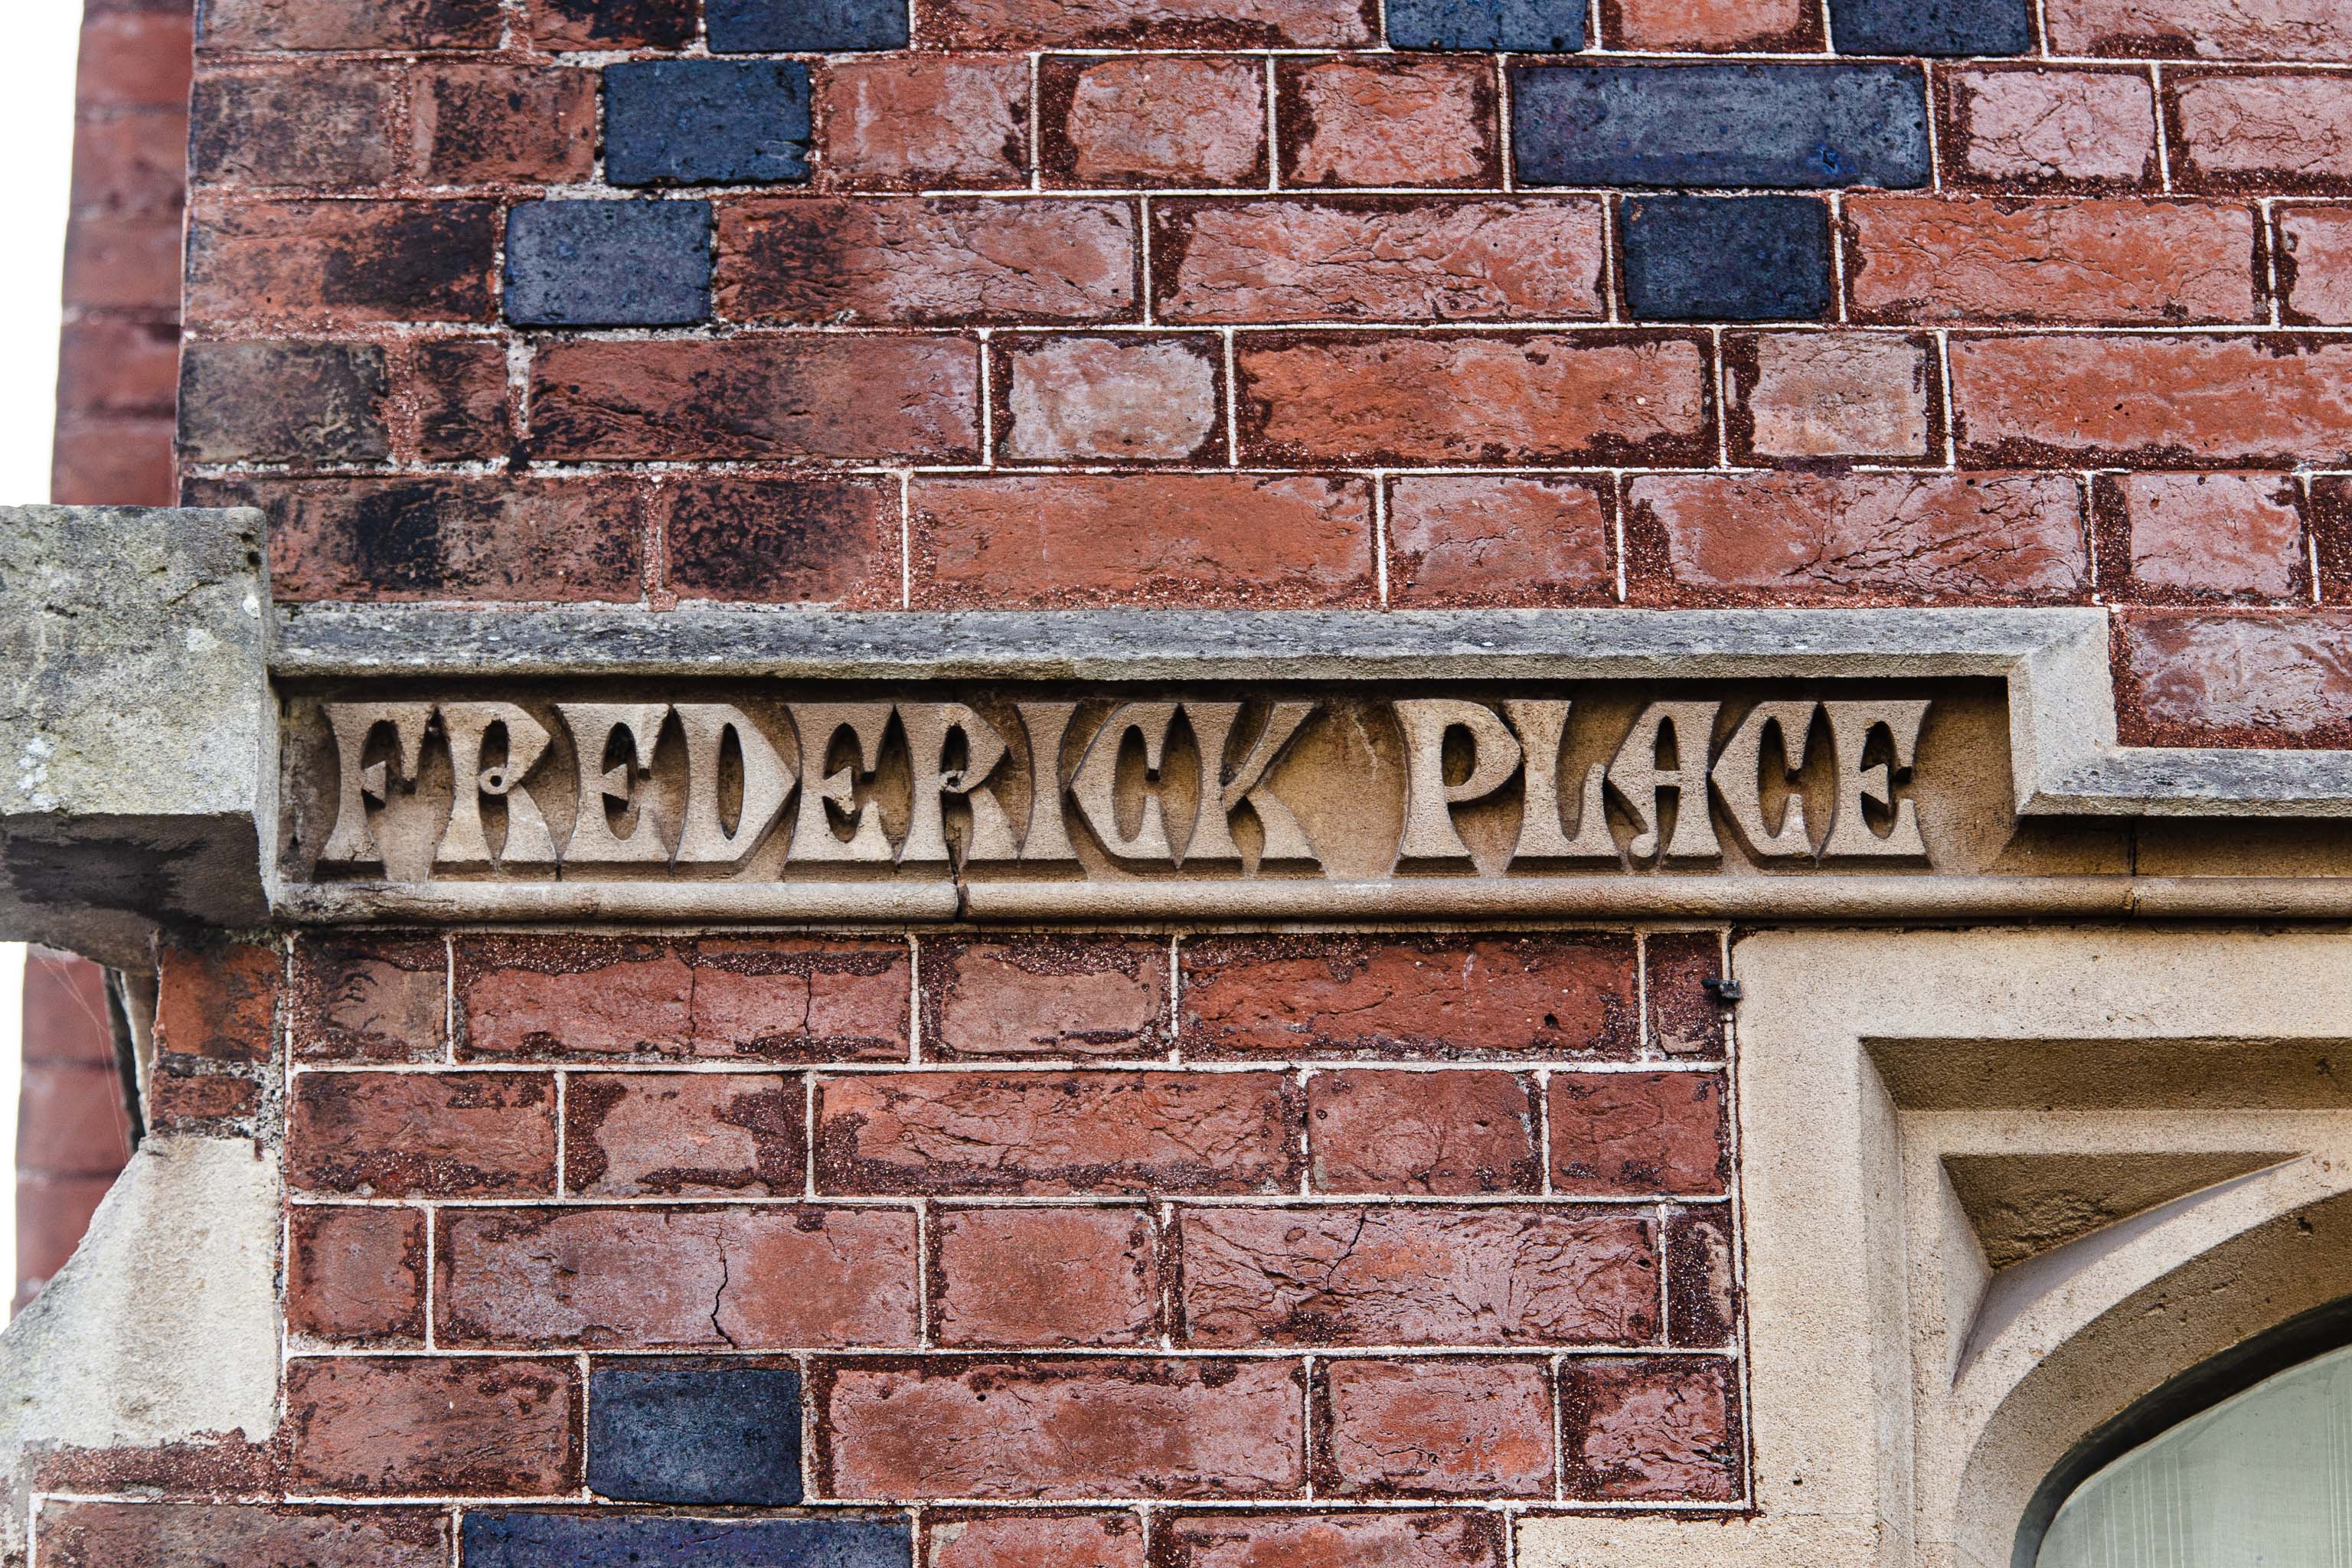 FREDERICK PLACE
Amazing lettering
